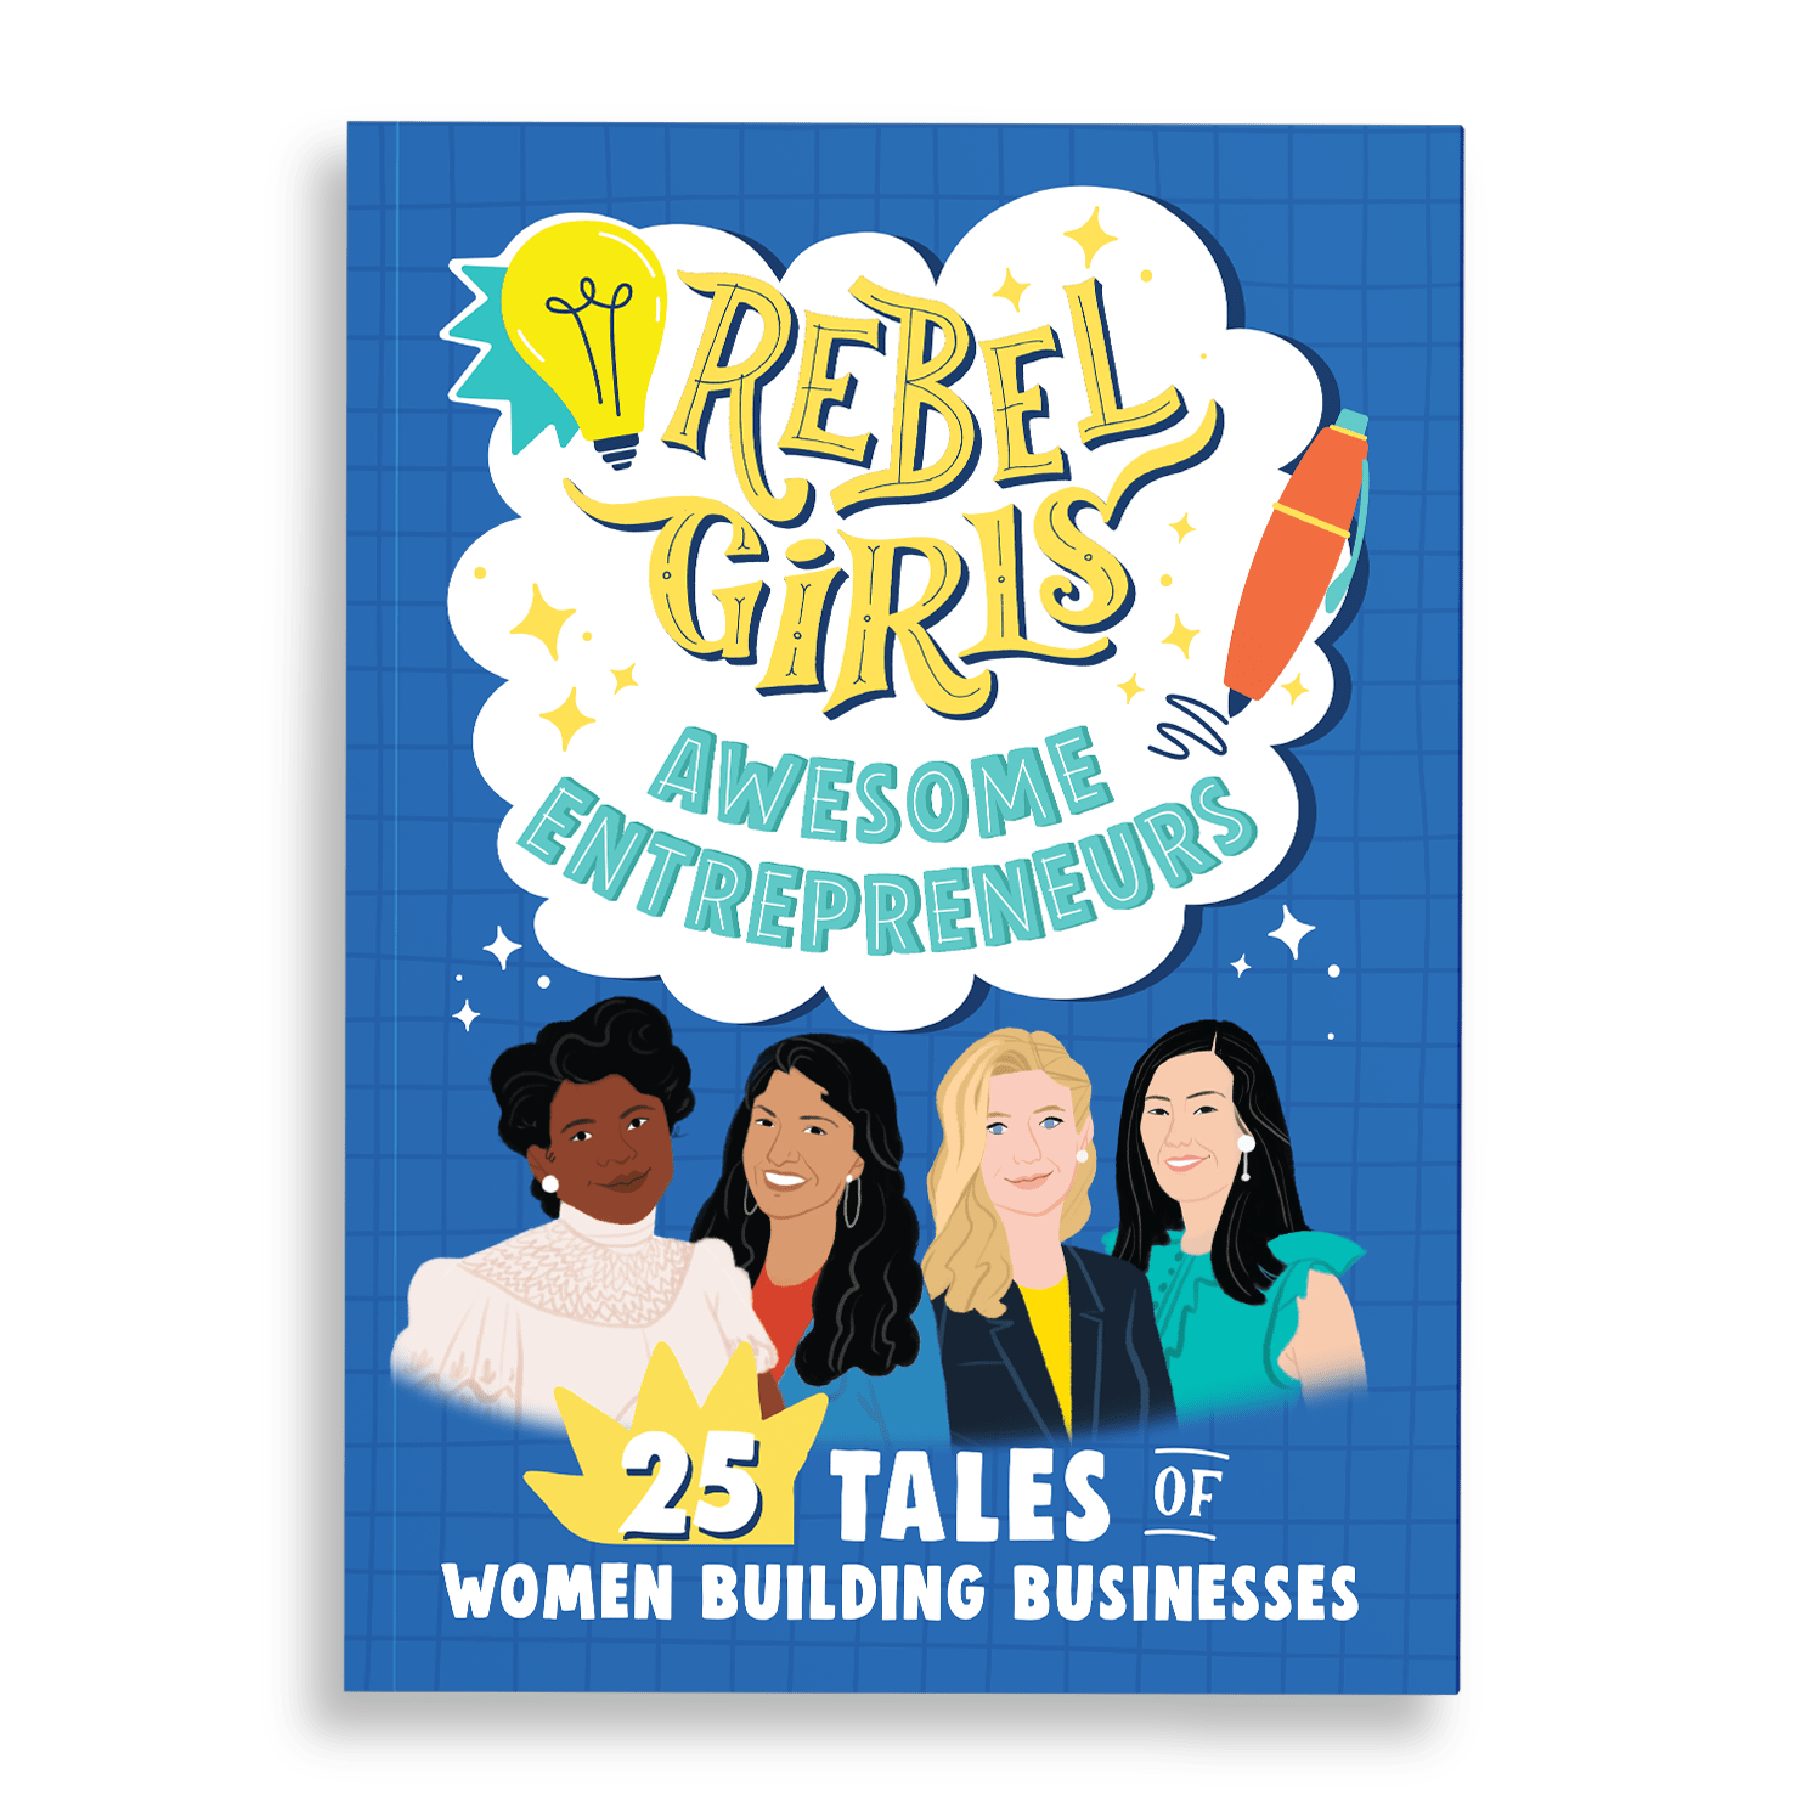 Rebel Girls: Awesome Entrepreneurs - 25 Tales of Women Buiding Businesses